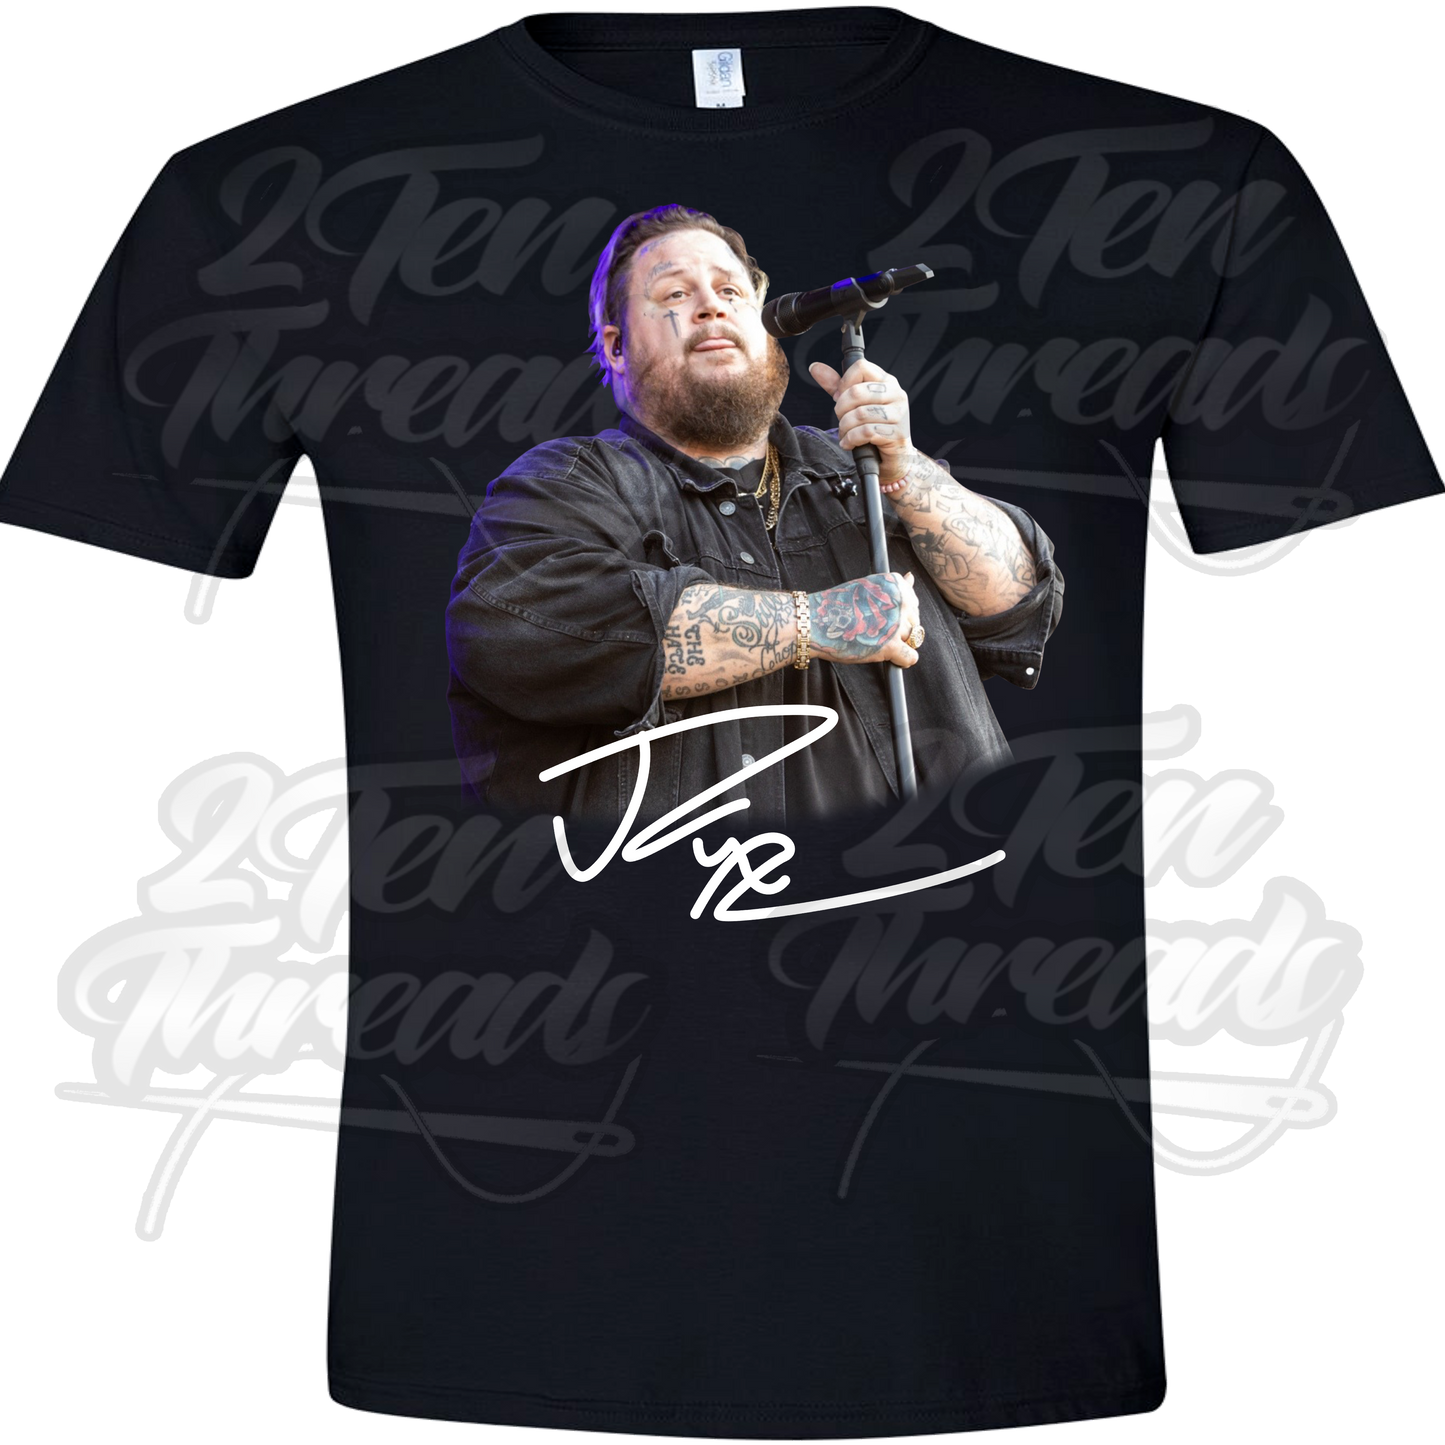 Signed Jelly Roll Shirt